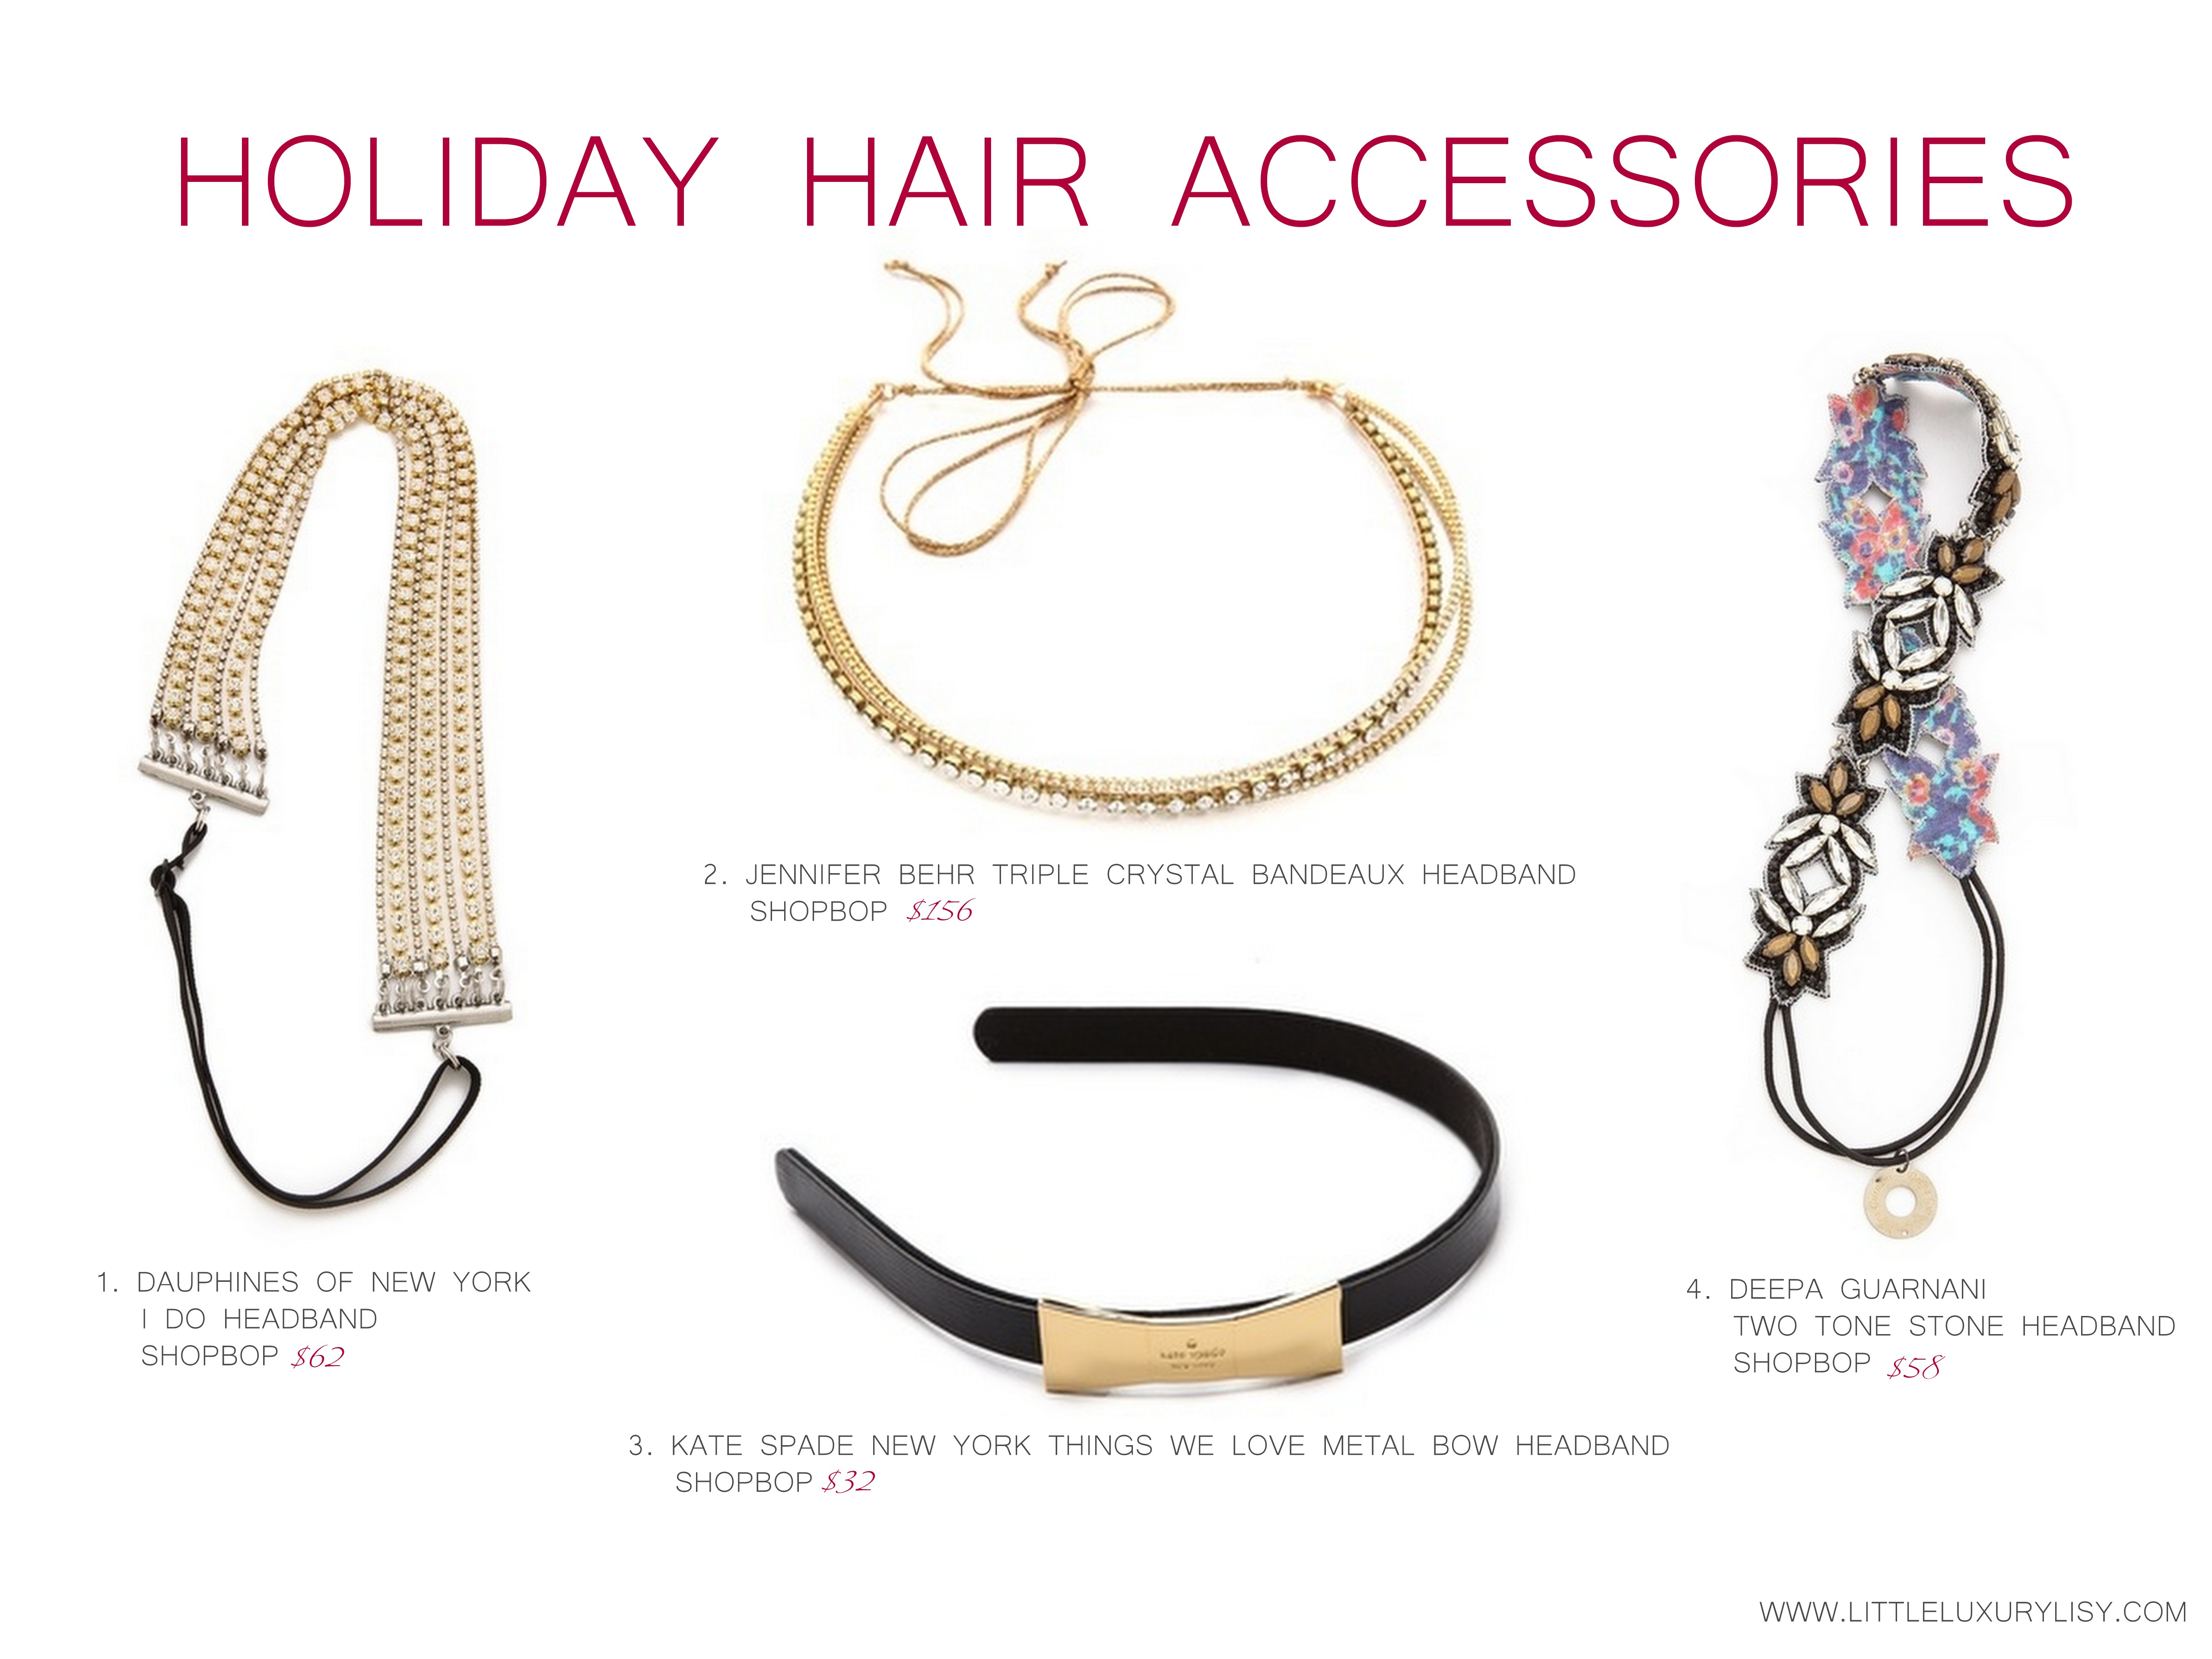 Holiday hair accessories at Shopbop by little luxury list